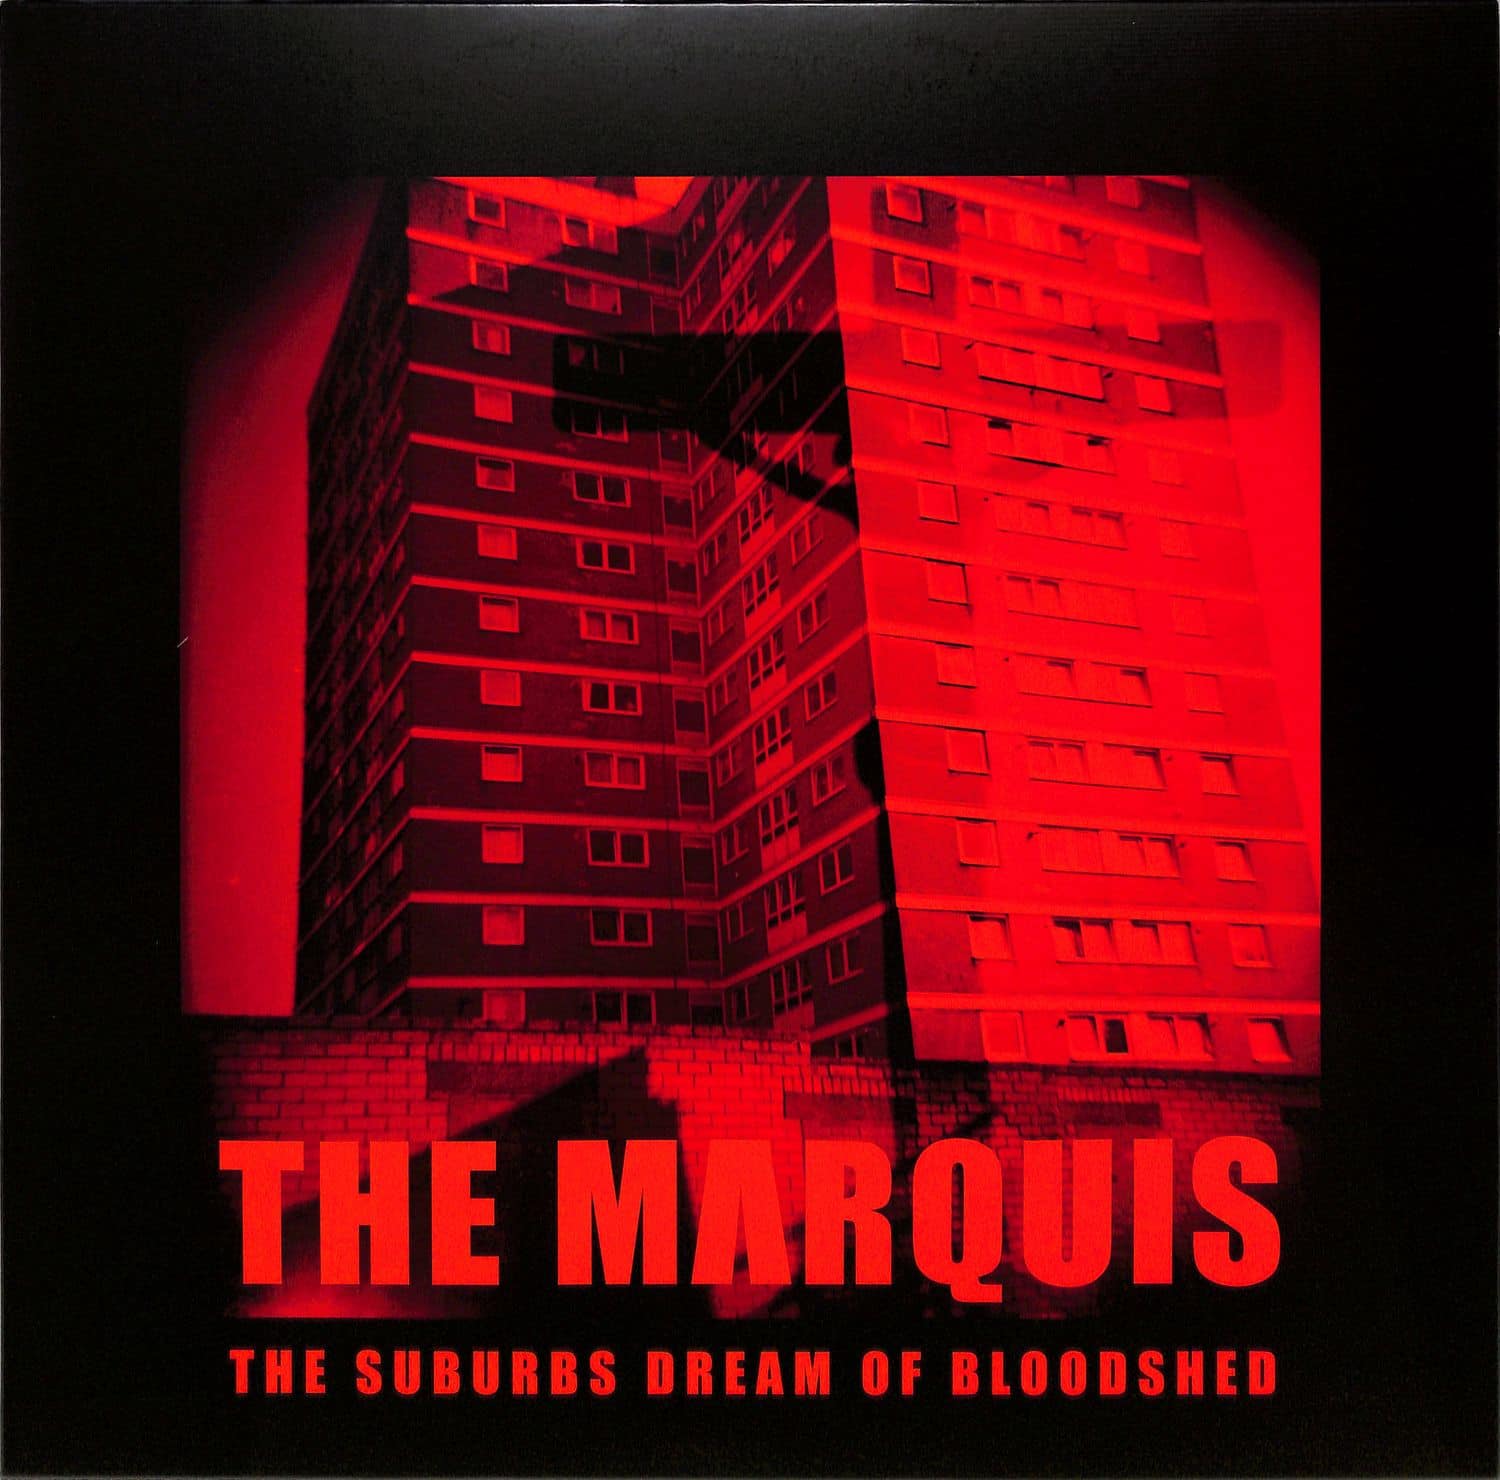 The Marquis - THE SUBURBS DREAM OF BLOODSHED 